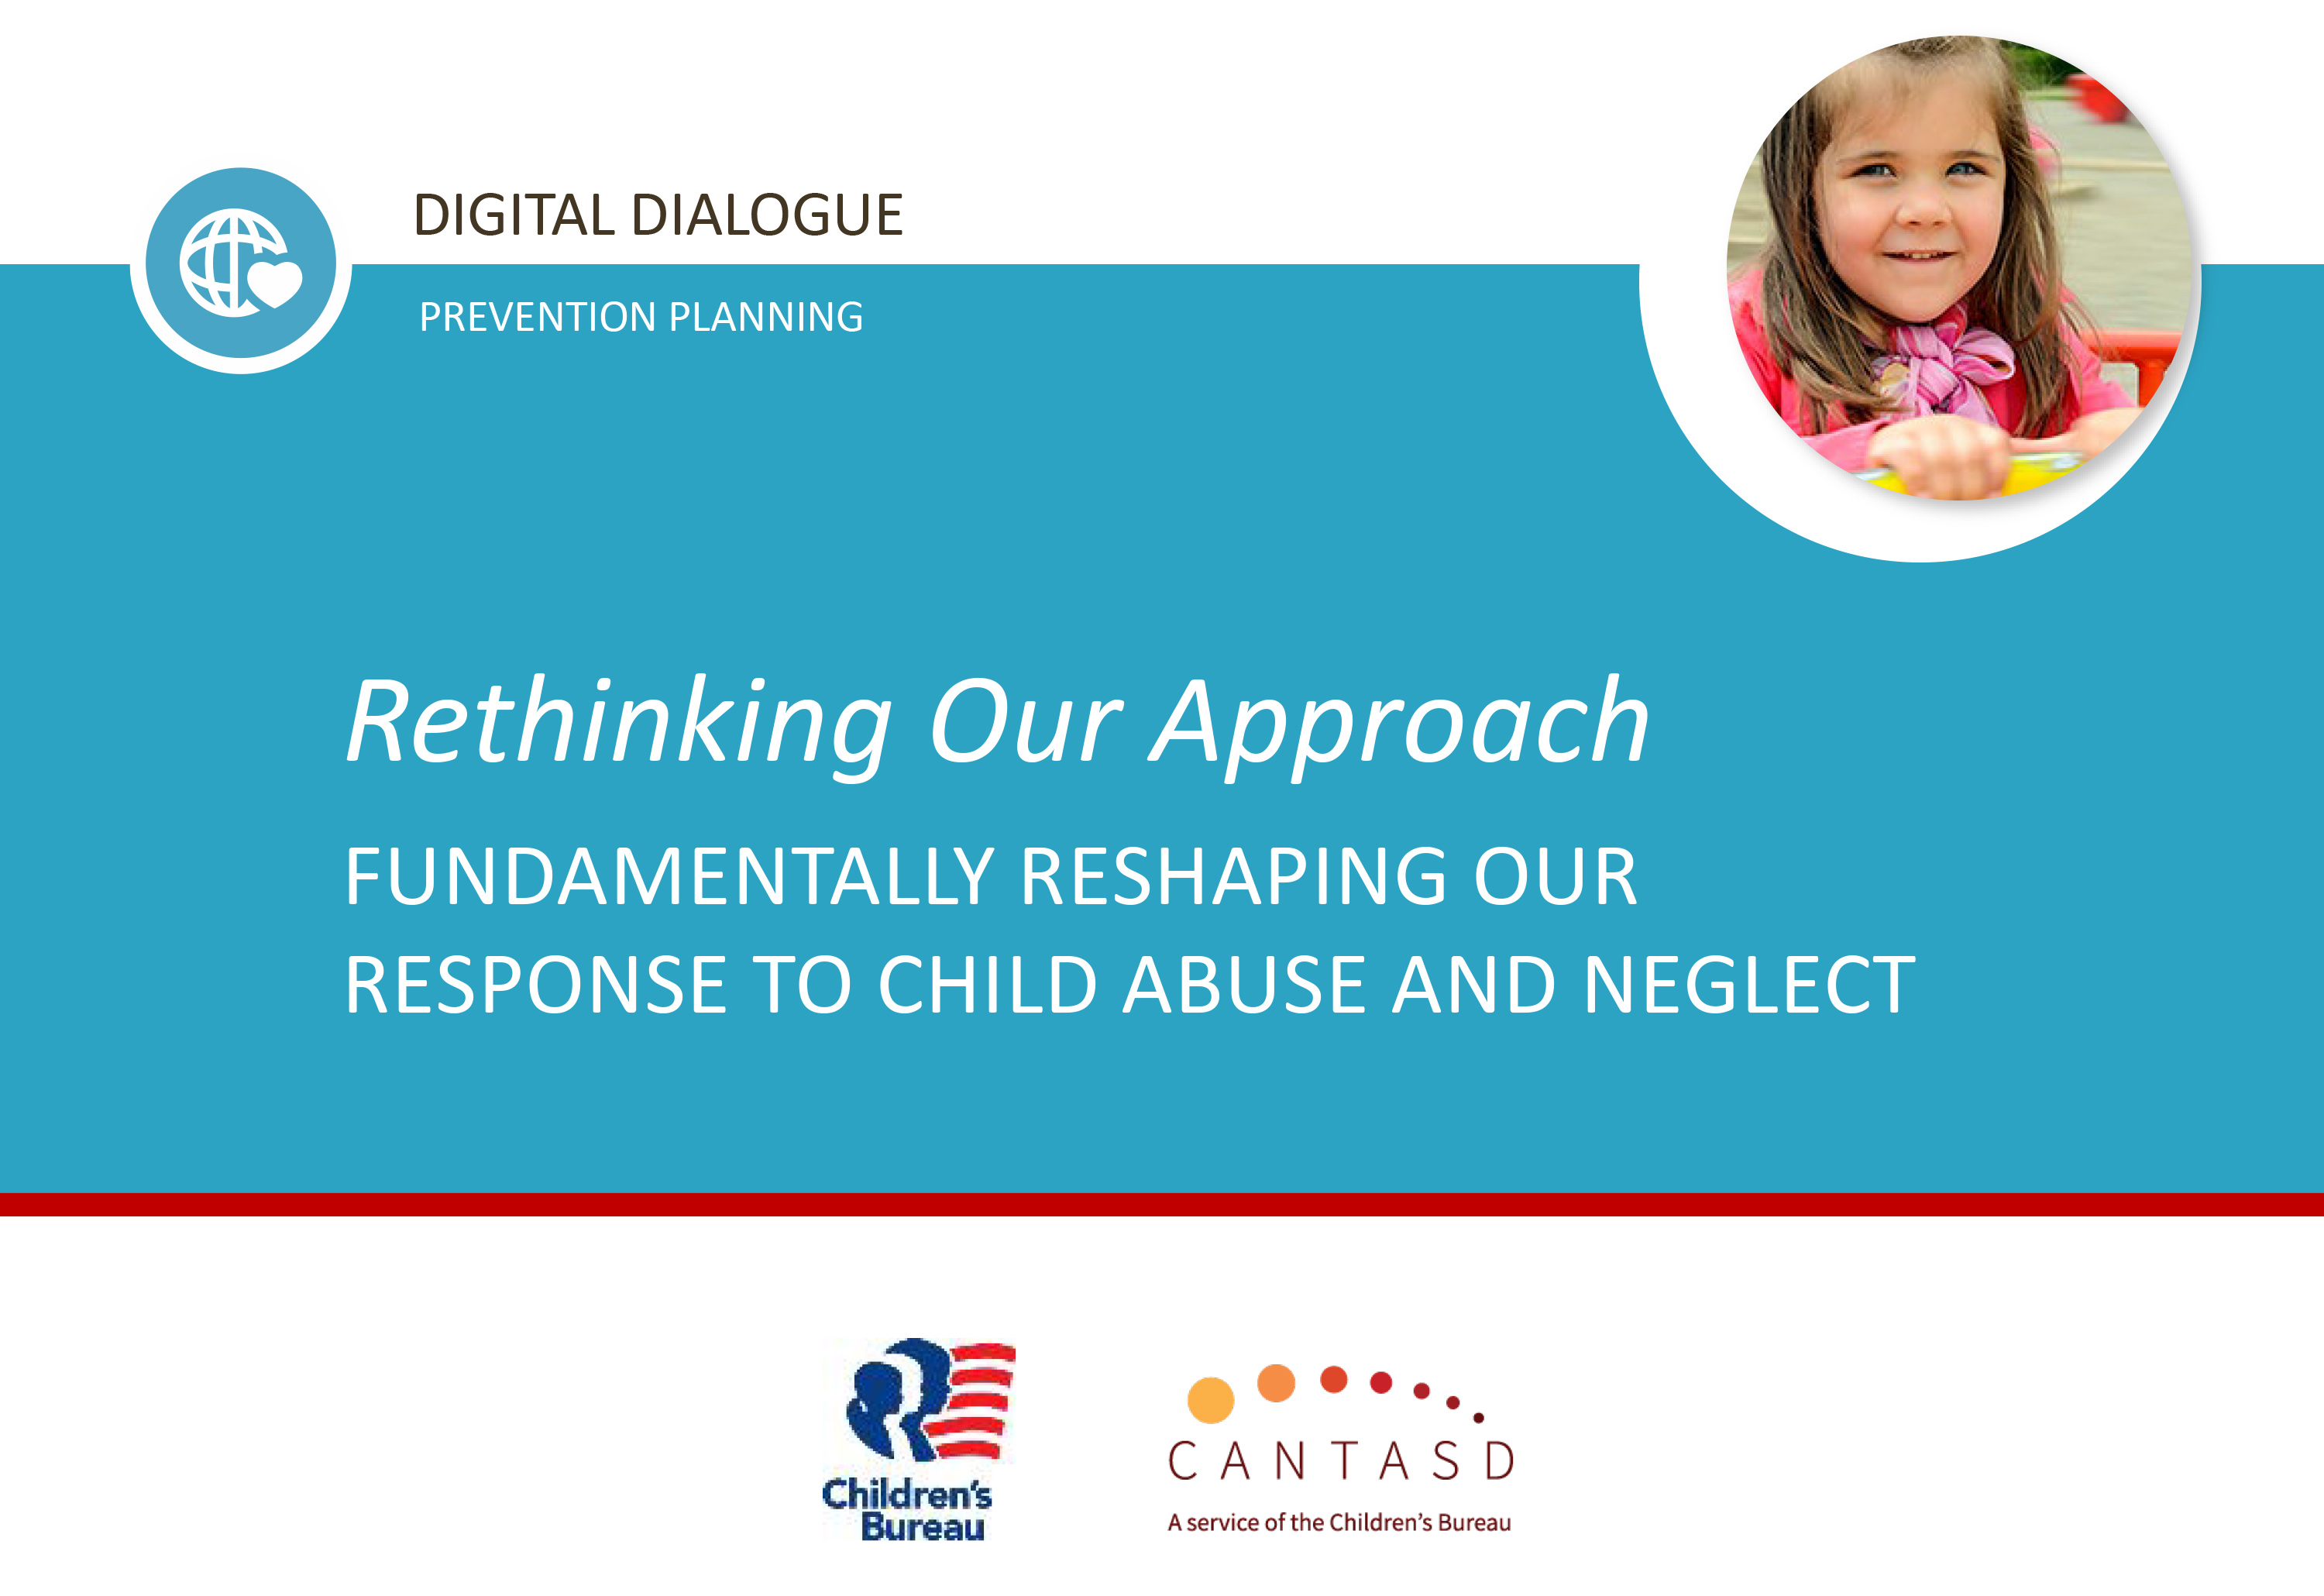 Recording of digital dialogue on Rethinking Our Approach: Fundamentally Reshaping Our Response to Child Abuse and Neglect (This link opens in a new window)